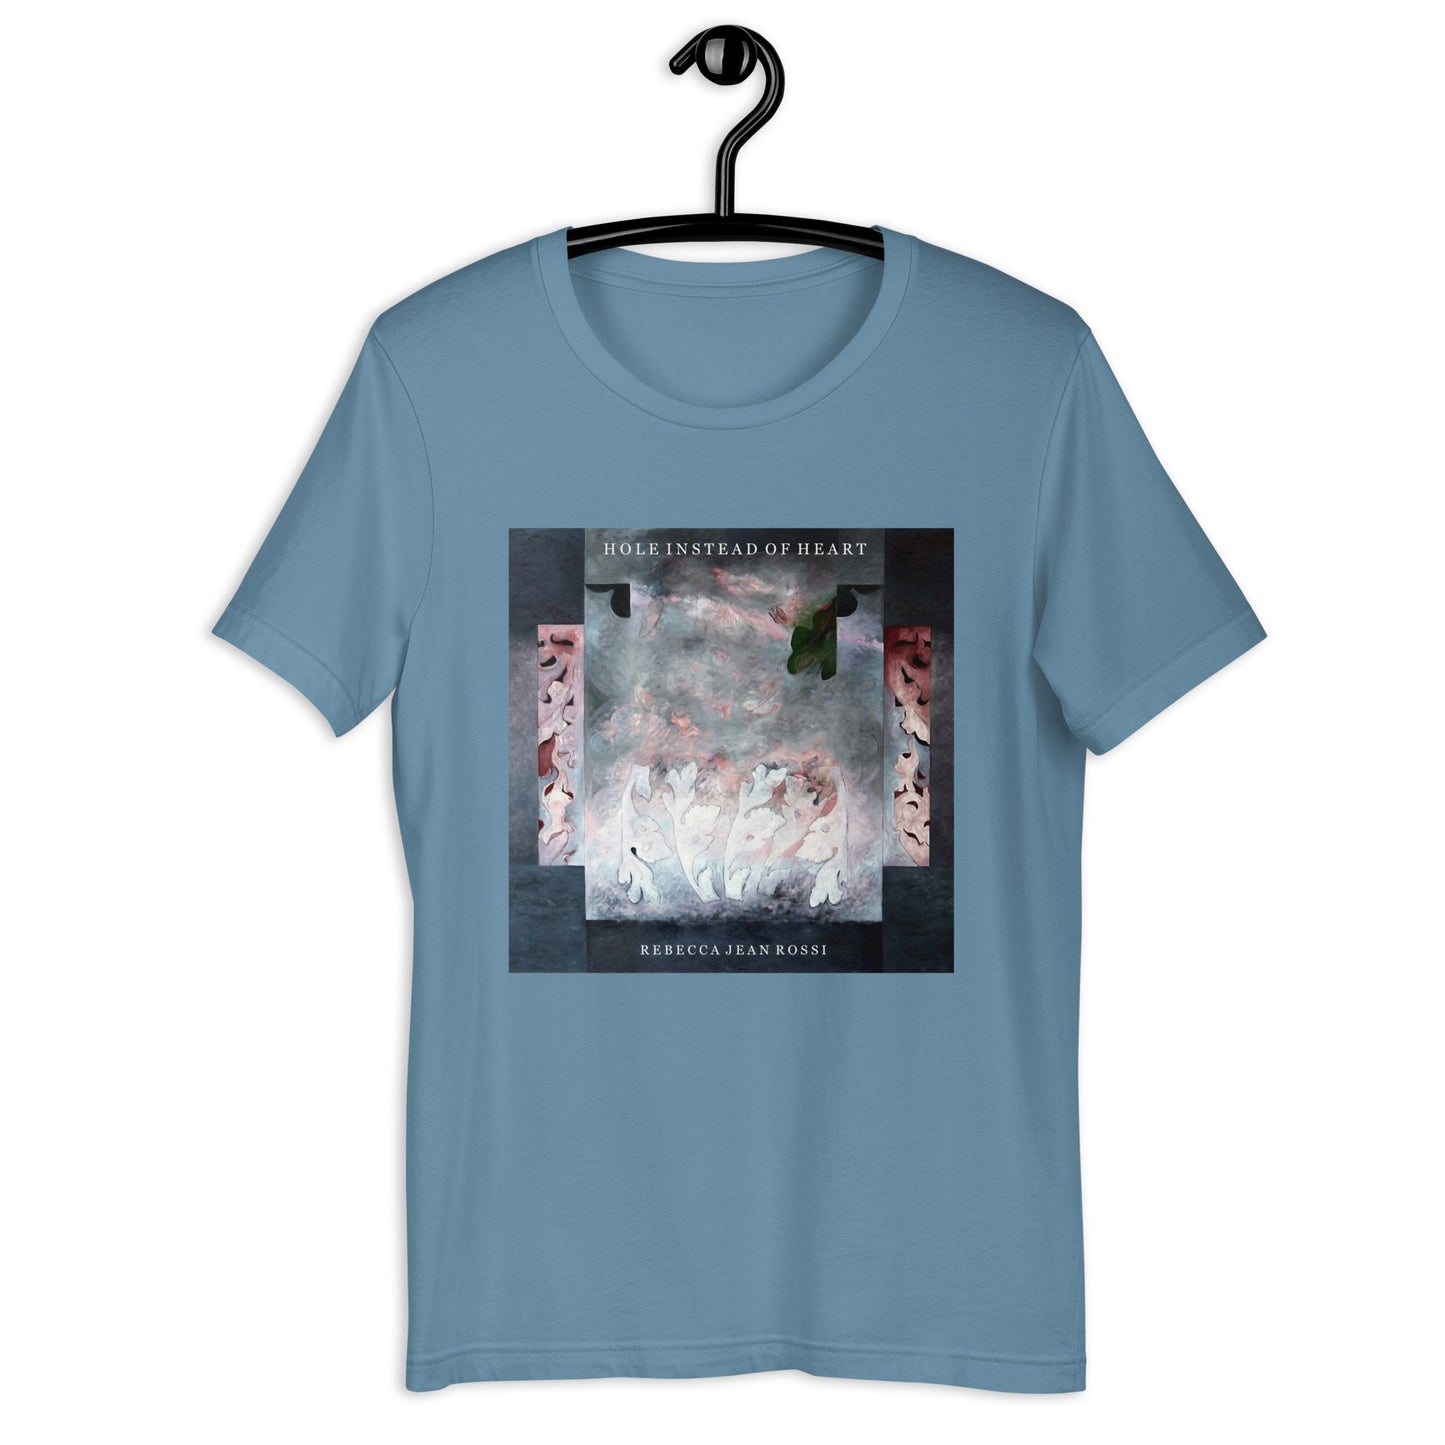 Unisex t-shirt "Hole Instead of Heart" album art by Greg Rossi